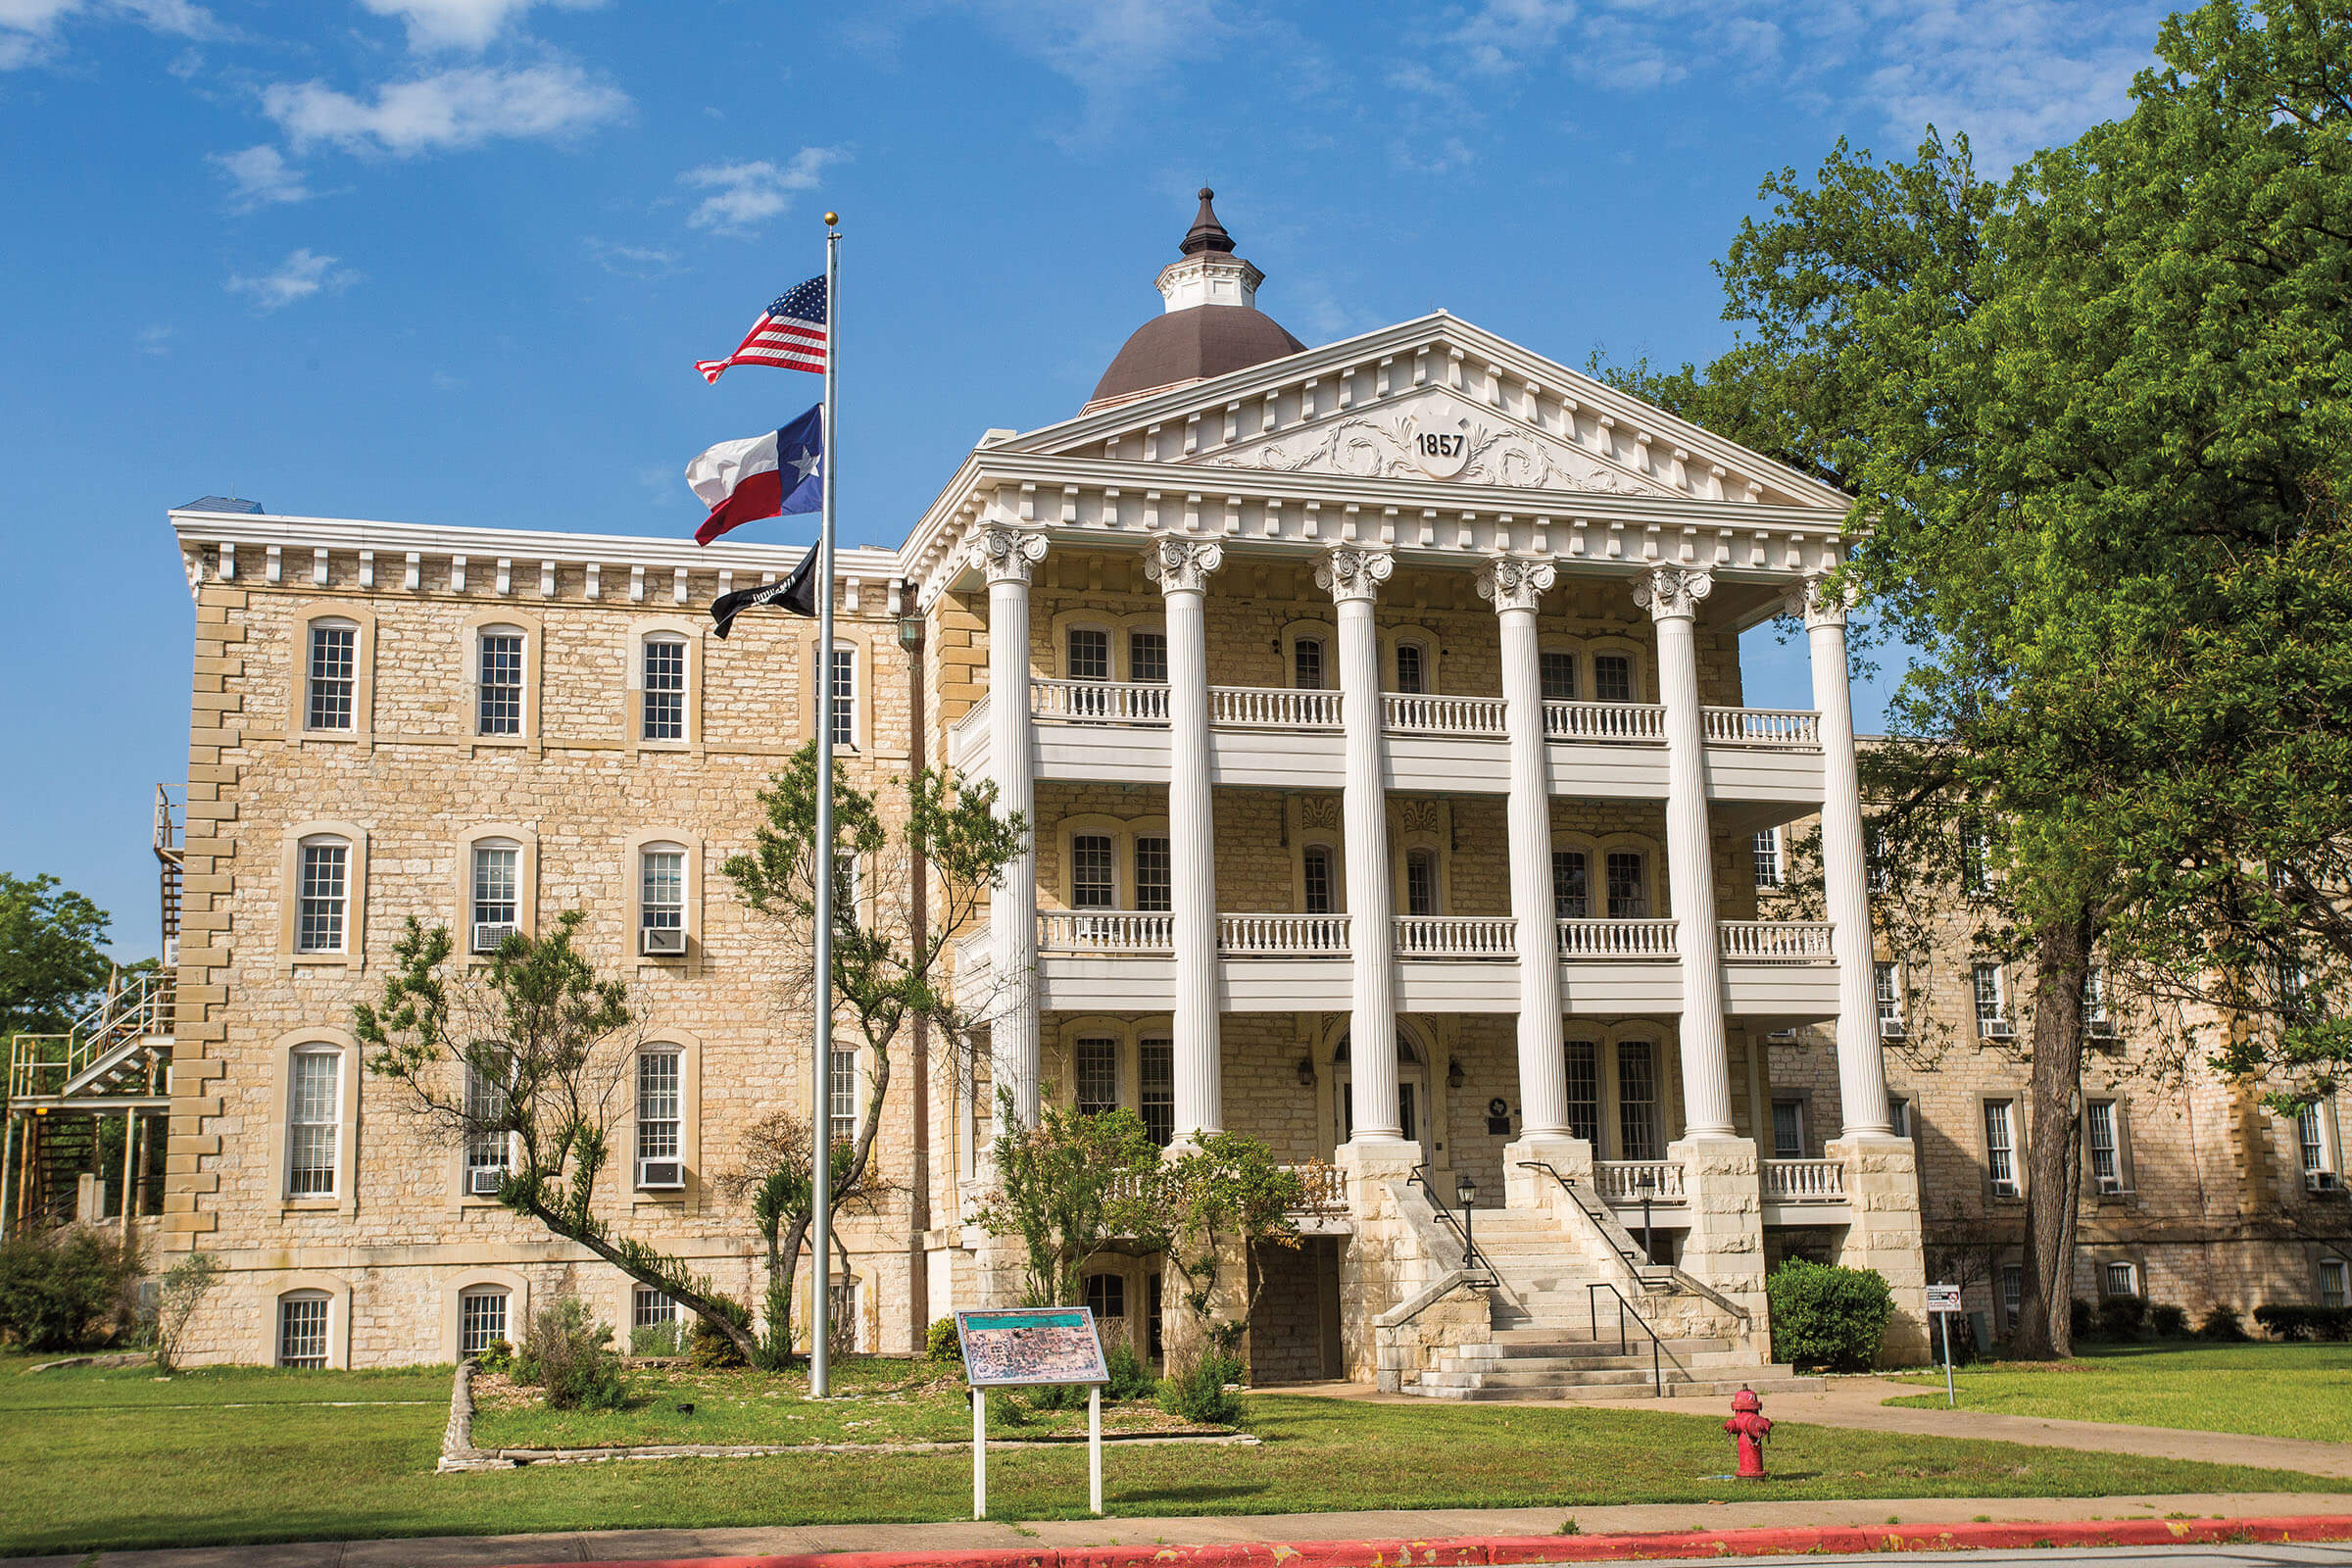 The outside of a three-story stone building with a Texas and United States flag flying